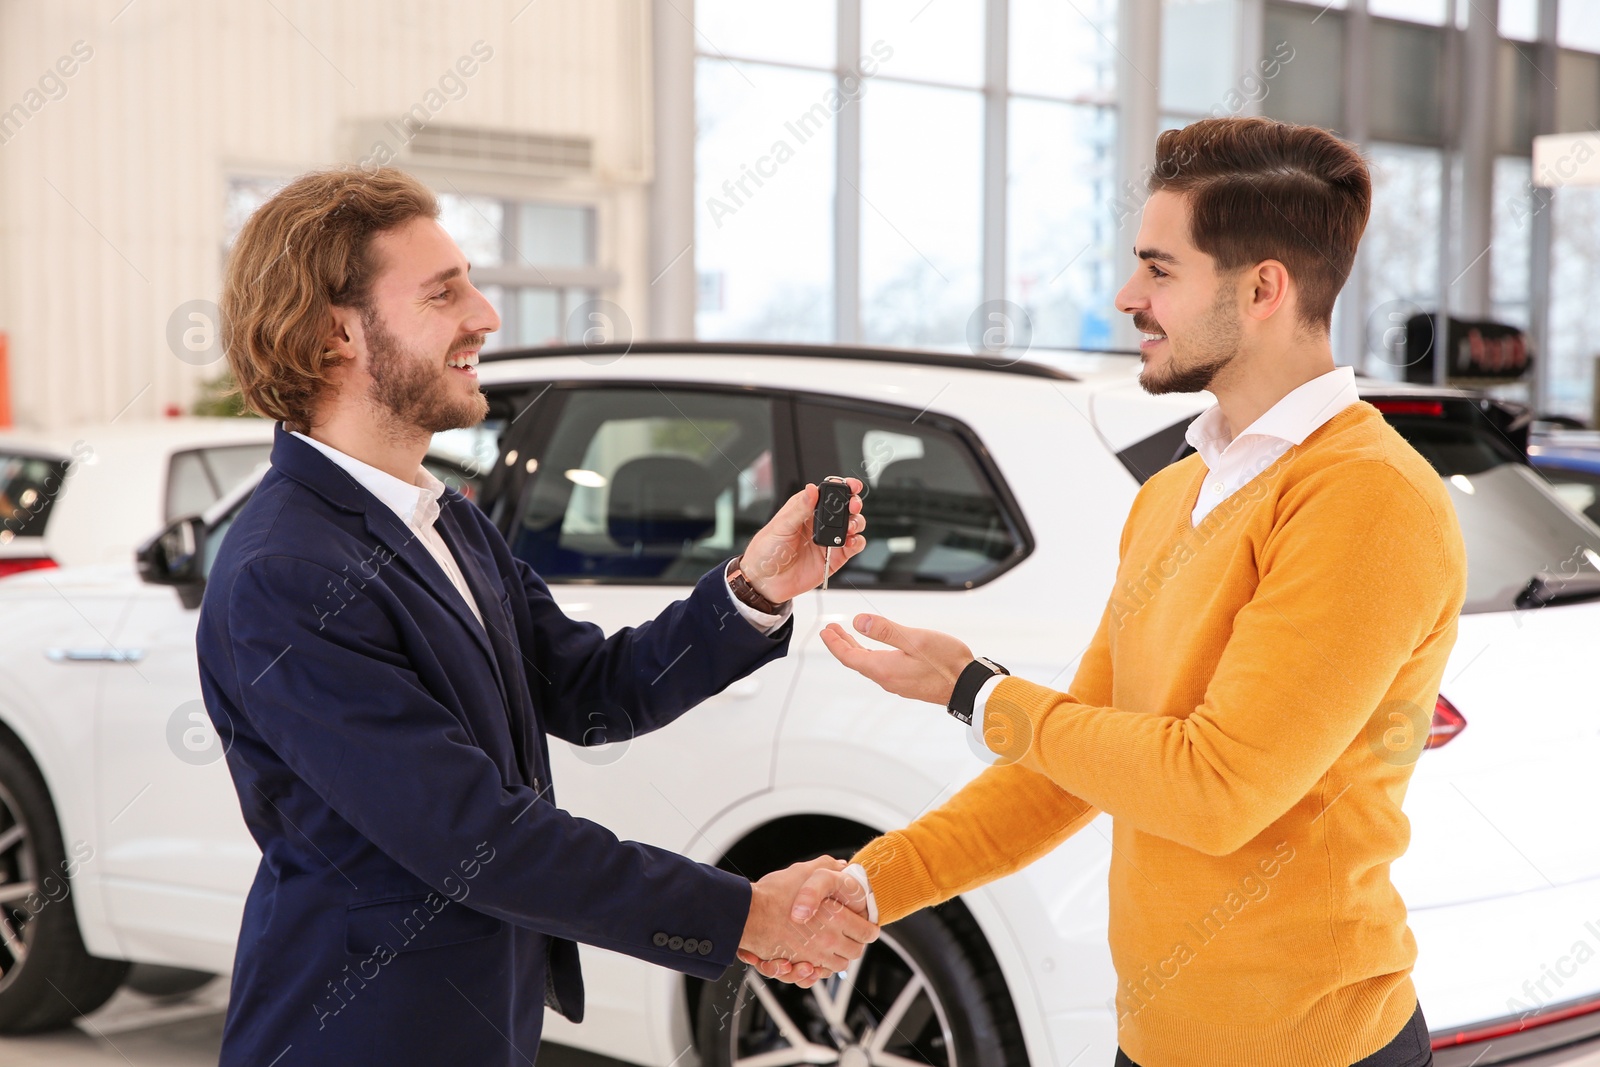 Photo of Car salesman giving key to customer while shaking hands in dealership